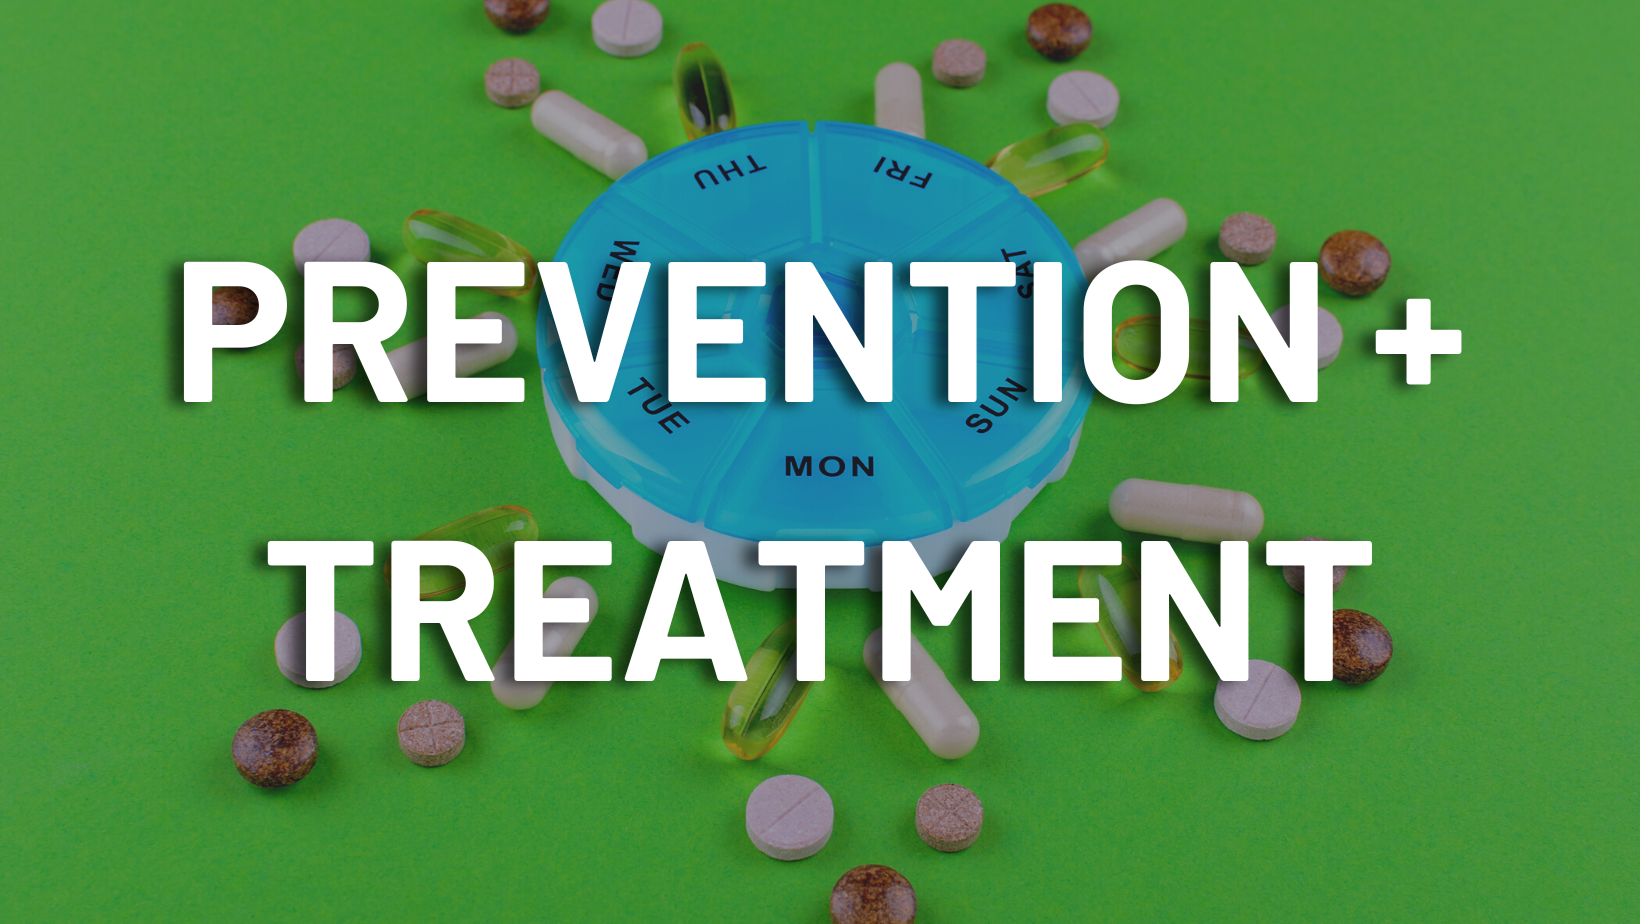 A green background with the words `` prevention + treatment '' surrounded by pills.